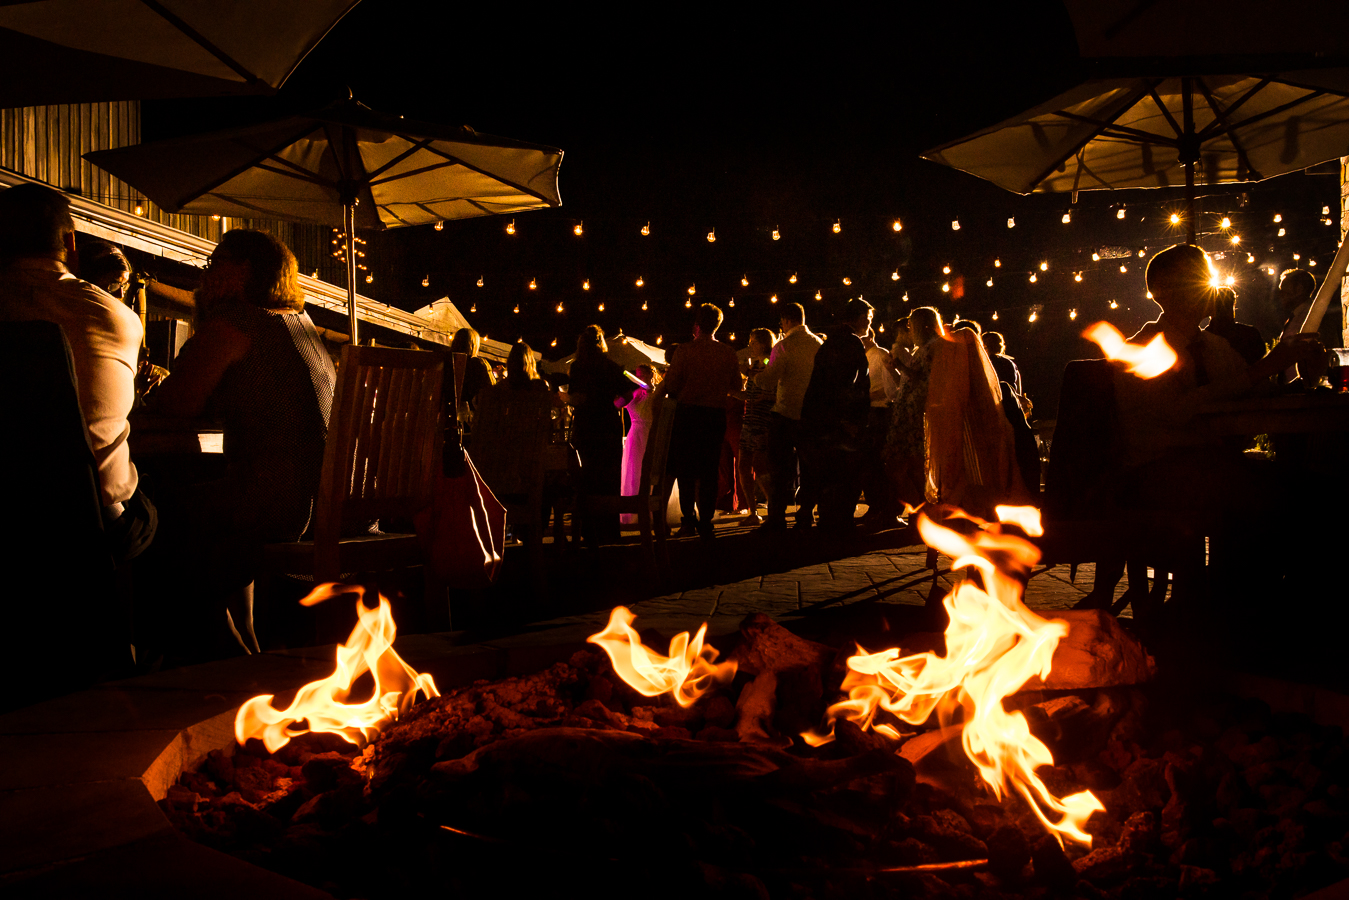 creative Oak Lodge outdoor Wedding Photographer, rhinehart photography, captures this fun image of the wedding reception of family and friends dancing while others gather around the warm fire pit to catch up 